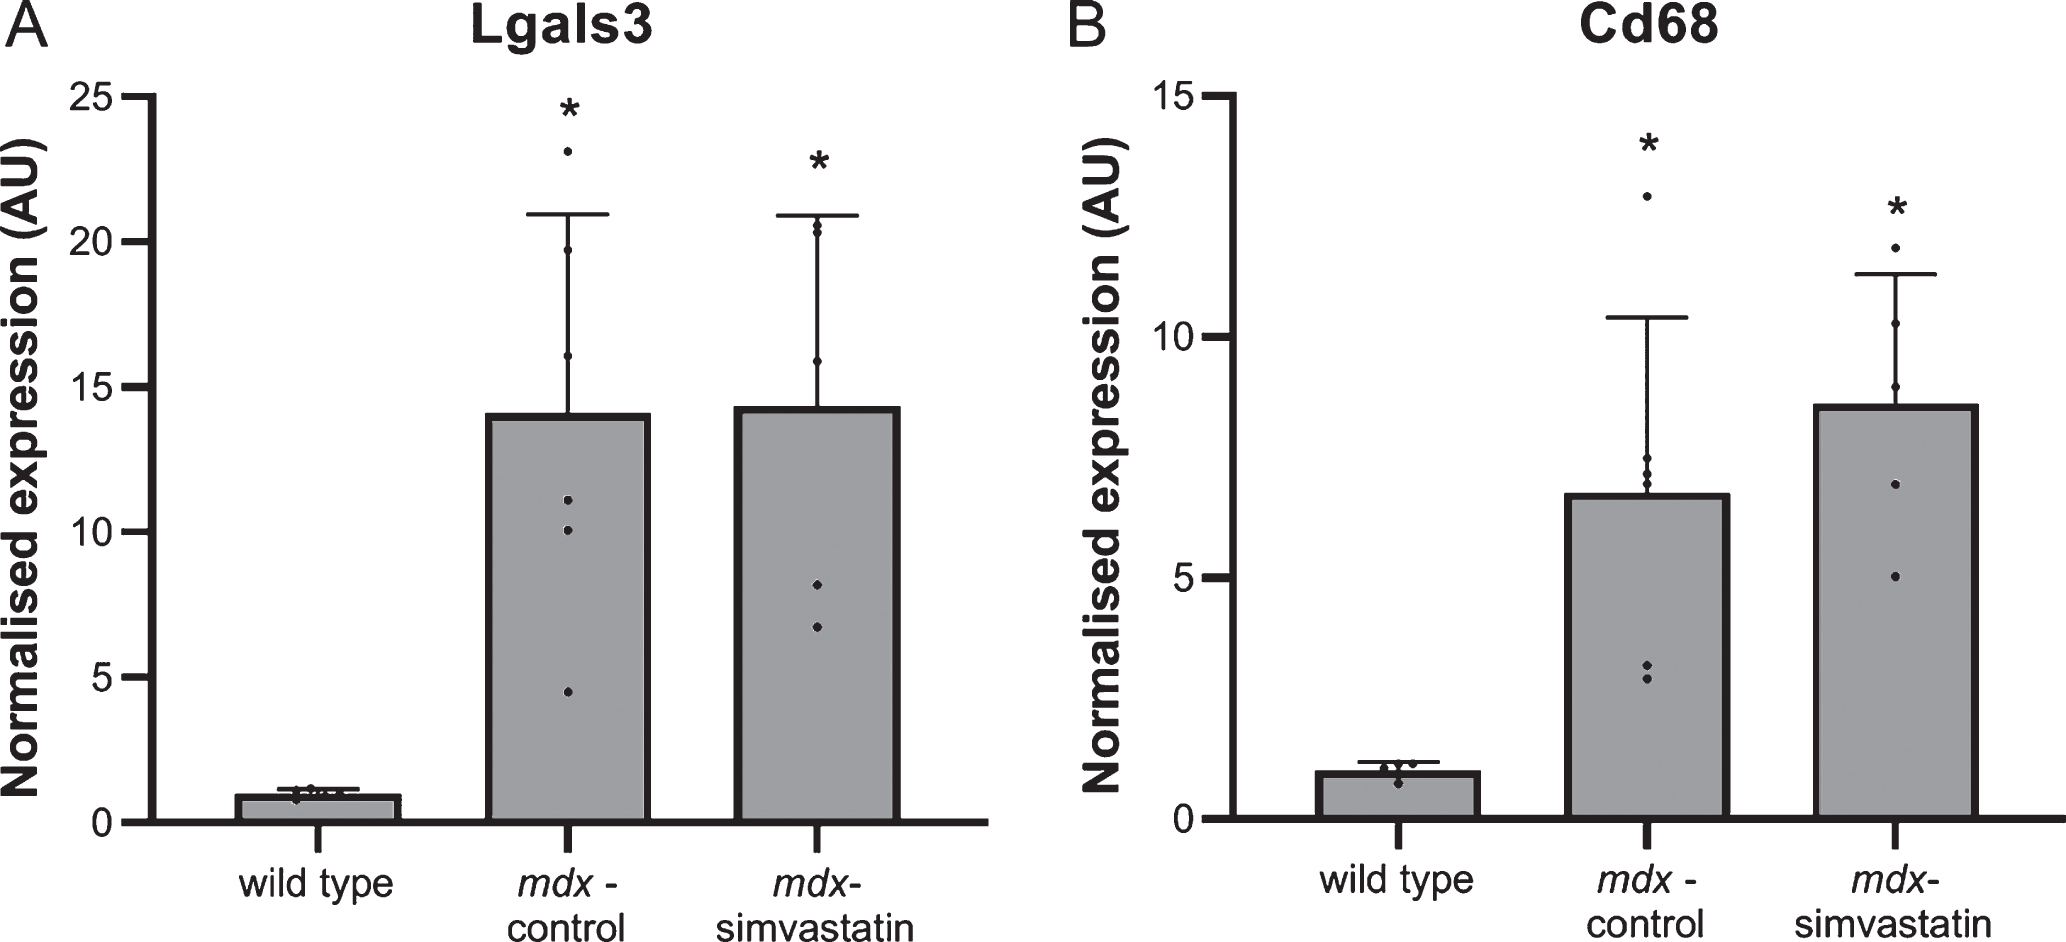 Inflammation. Expression of (A) Lgals3 and (B) CD68 in the diaphragm of 16-week old mice after 12 weeks of simvastatin treatment (n = 5–6). *p < 0.05 compared to wild type mice.